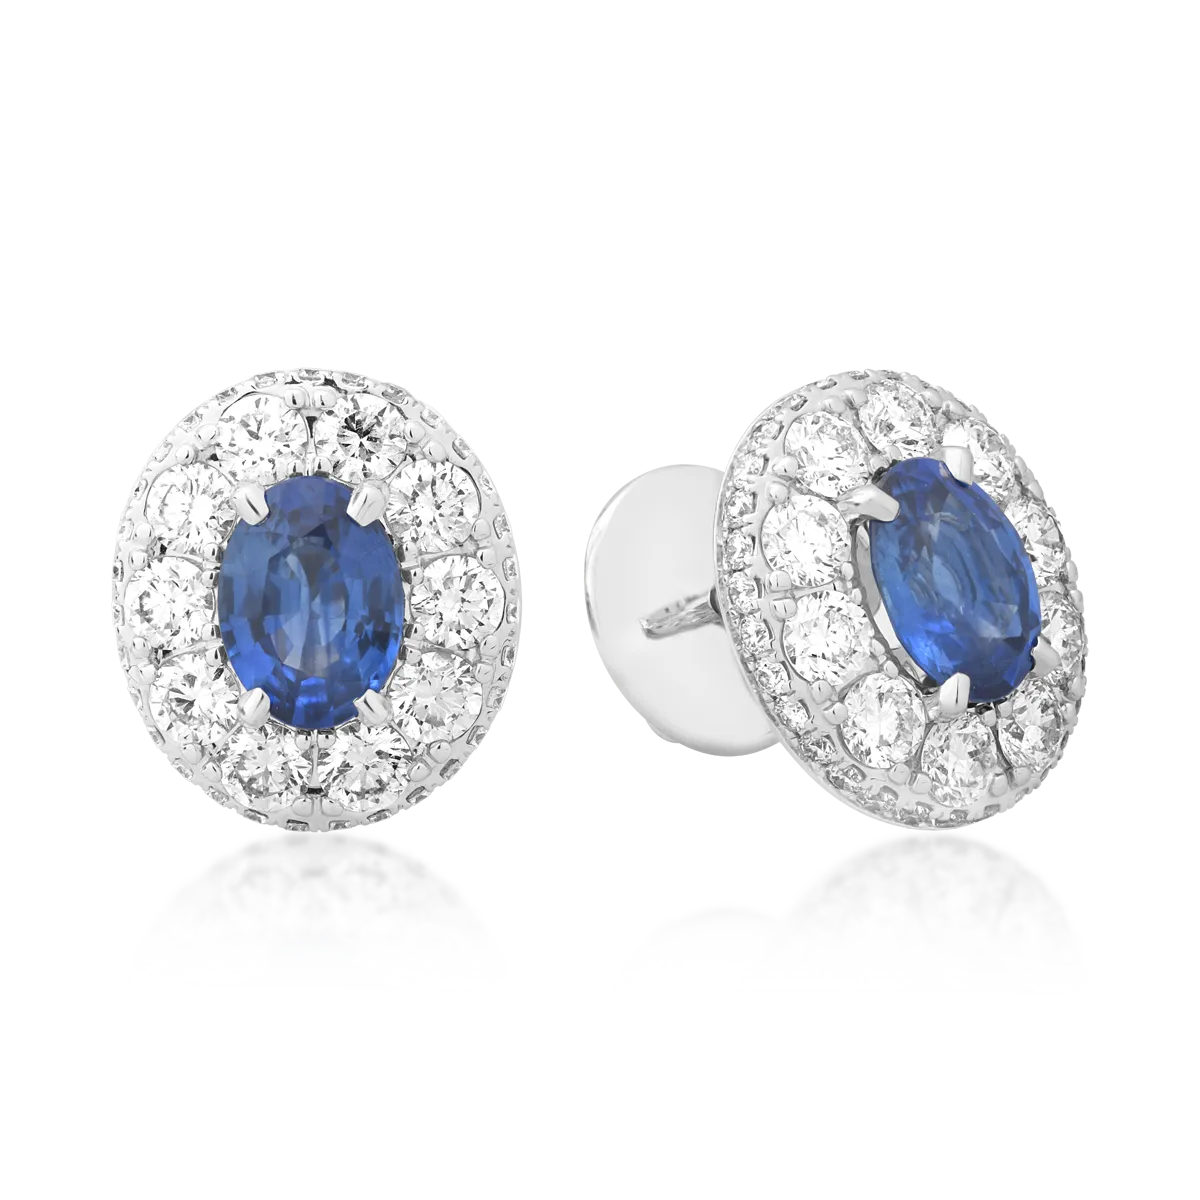 18K white gold earrings with 2.35ct diffused sapphires and 2.49ct diamonds